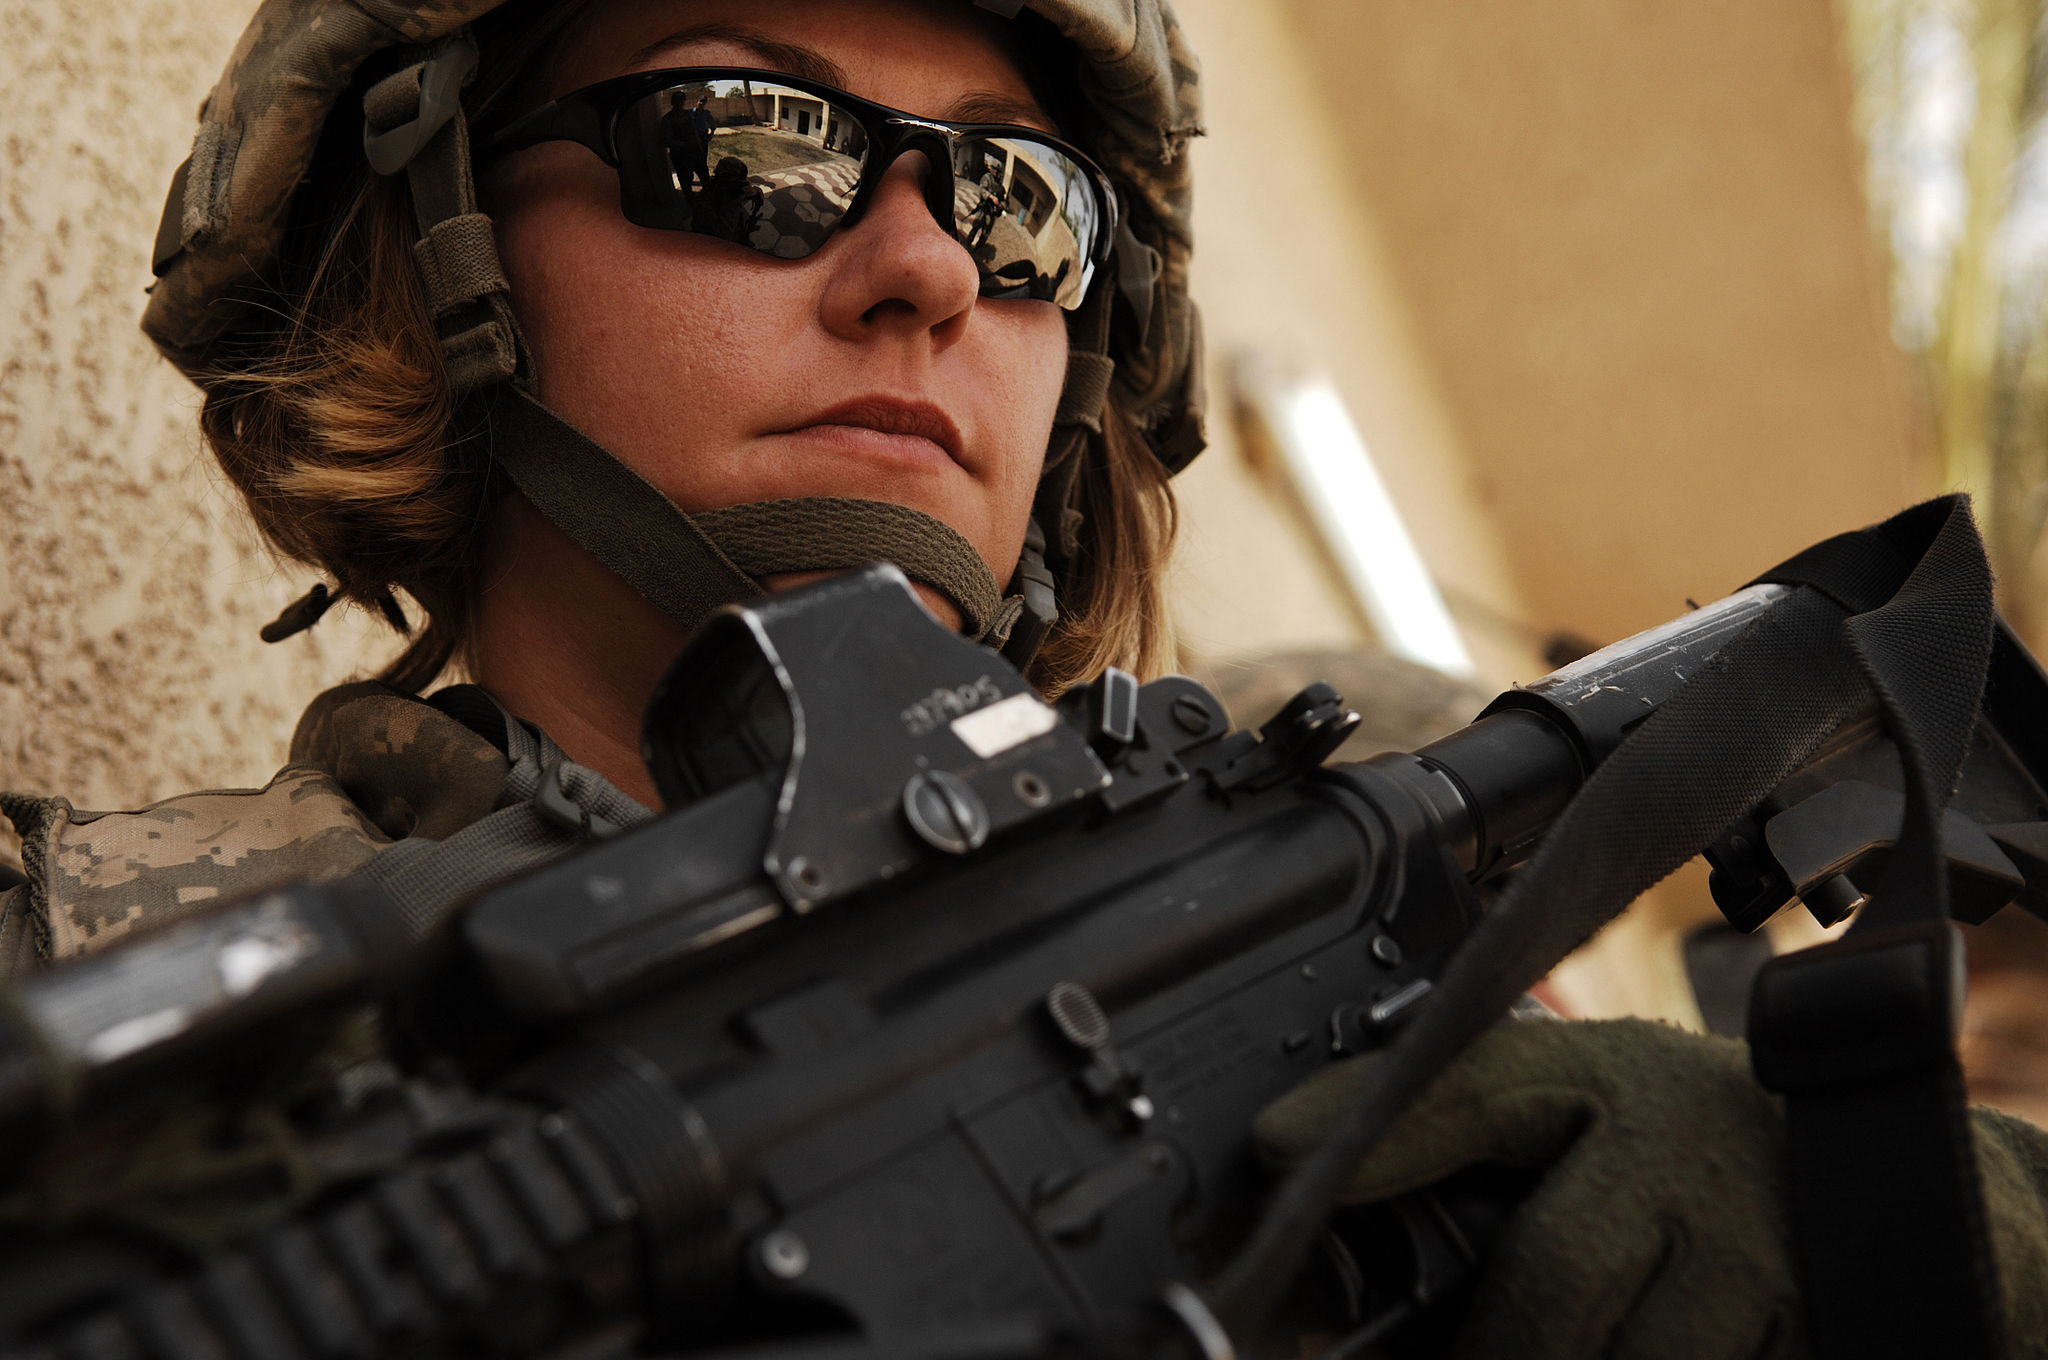 Soldier in Iraq, 2008, Department of Defense file image. Soldier not involved with KU study.